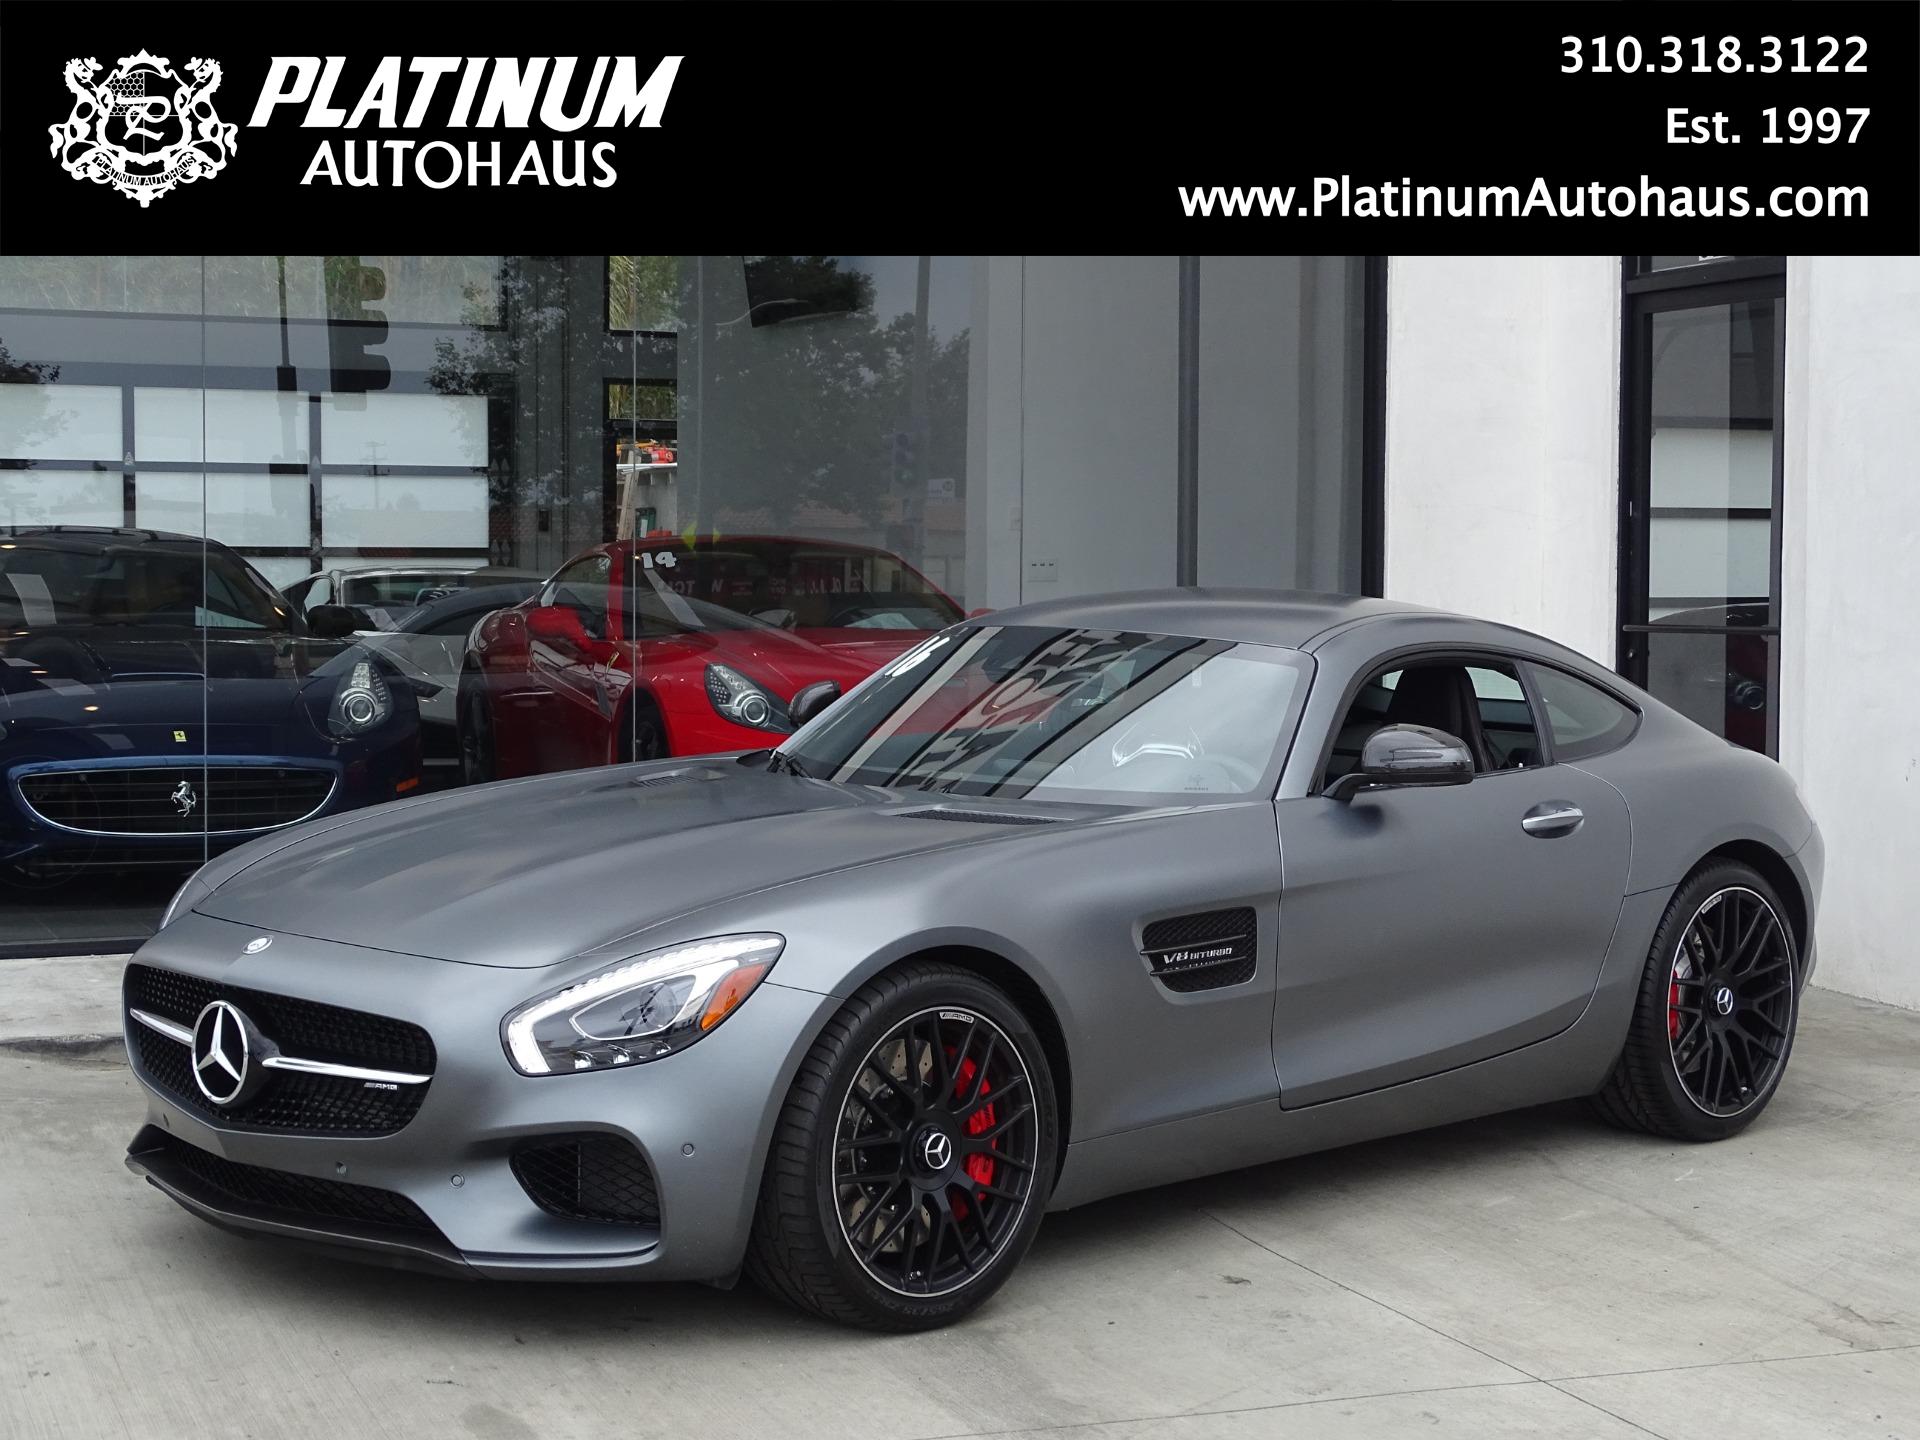 2016 Mercedes Benz AMG GT S Stock 7342 for sale near Redondo